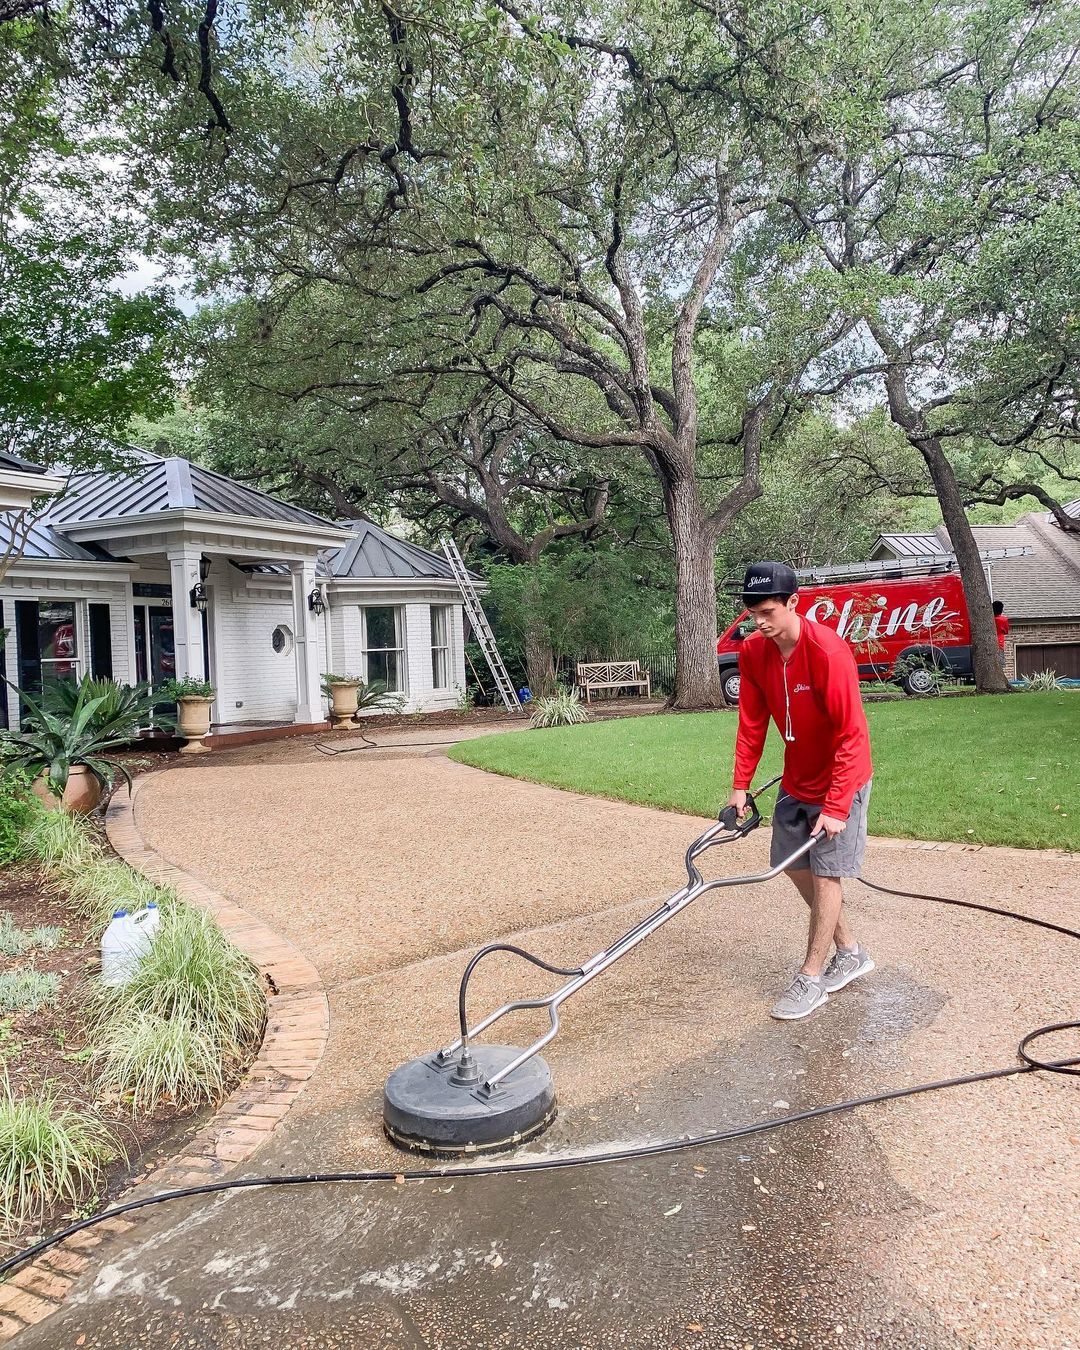 A Shine employee washing someone’s front driveway with a Shine van in the background.